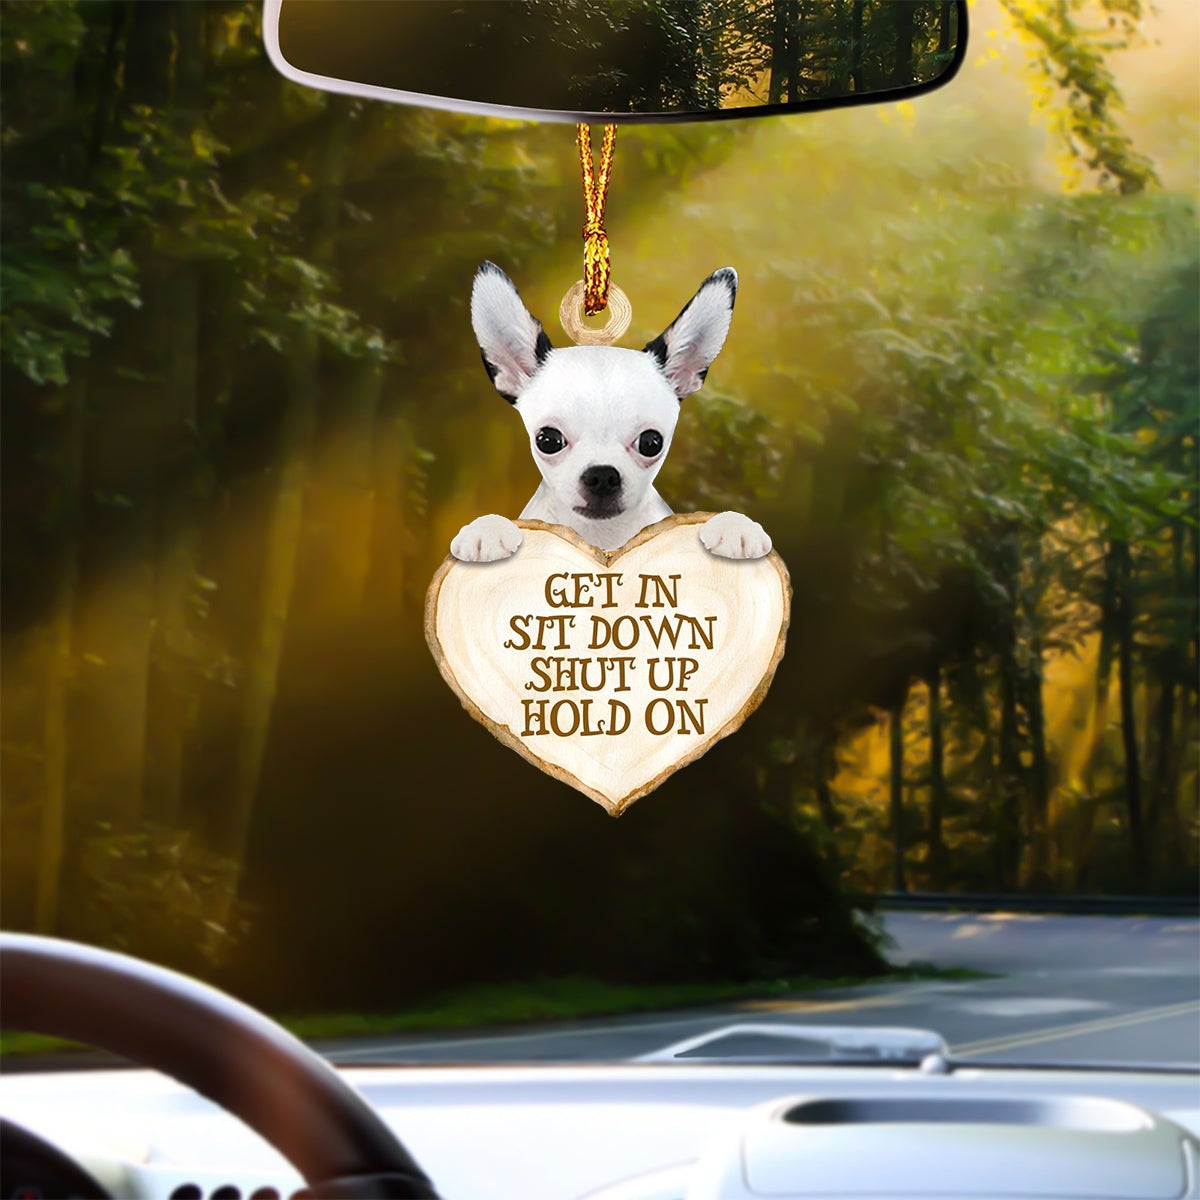 Chihuahua Heart Shape Get In Car Hanging Ornament